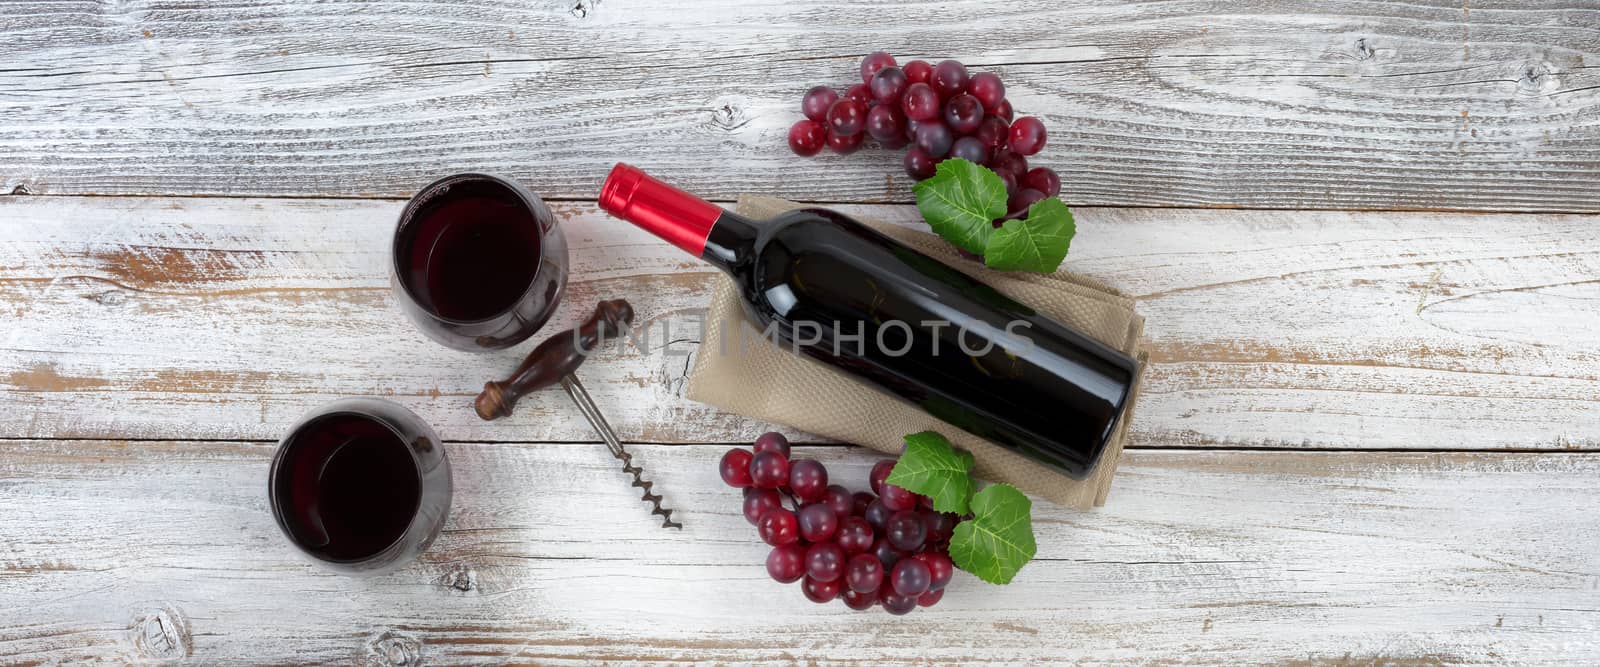 Red wine ready to drink with full bottle and grapes on white wea by tab1962